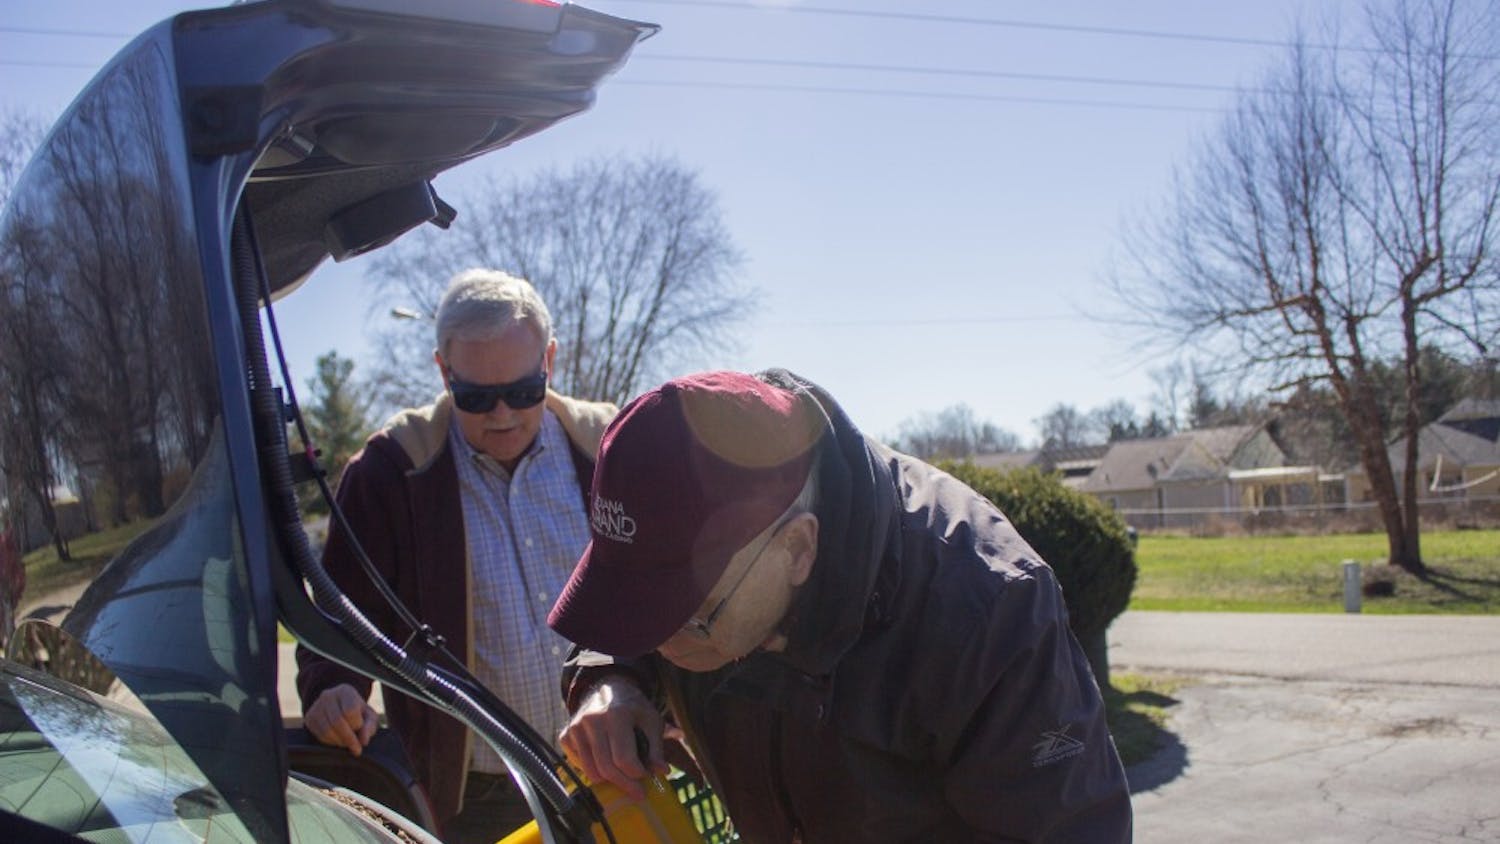 Meals on Wheels volunteers Pat Patterson and Bill Milroy retrieve a hot meal for one of their deliveries. The two men met through the program and now get together once a month to deliver meals to clients.